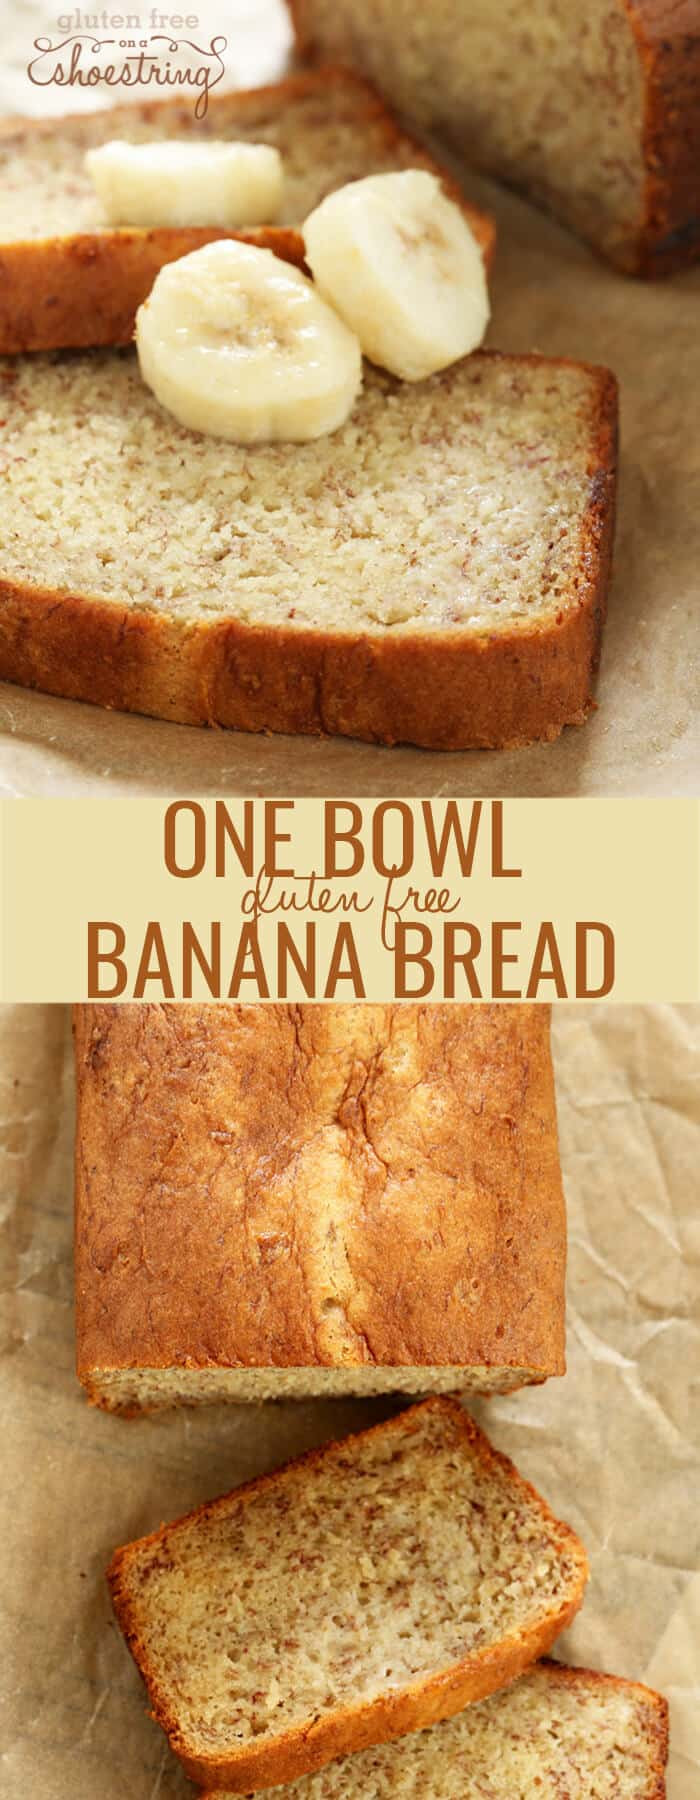 Gluten Free Bread Bowl
 Easy Gluten Free Banana Bread with a rice flour blend and